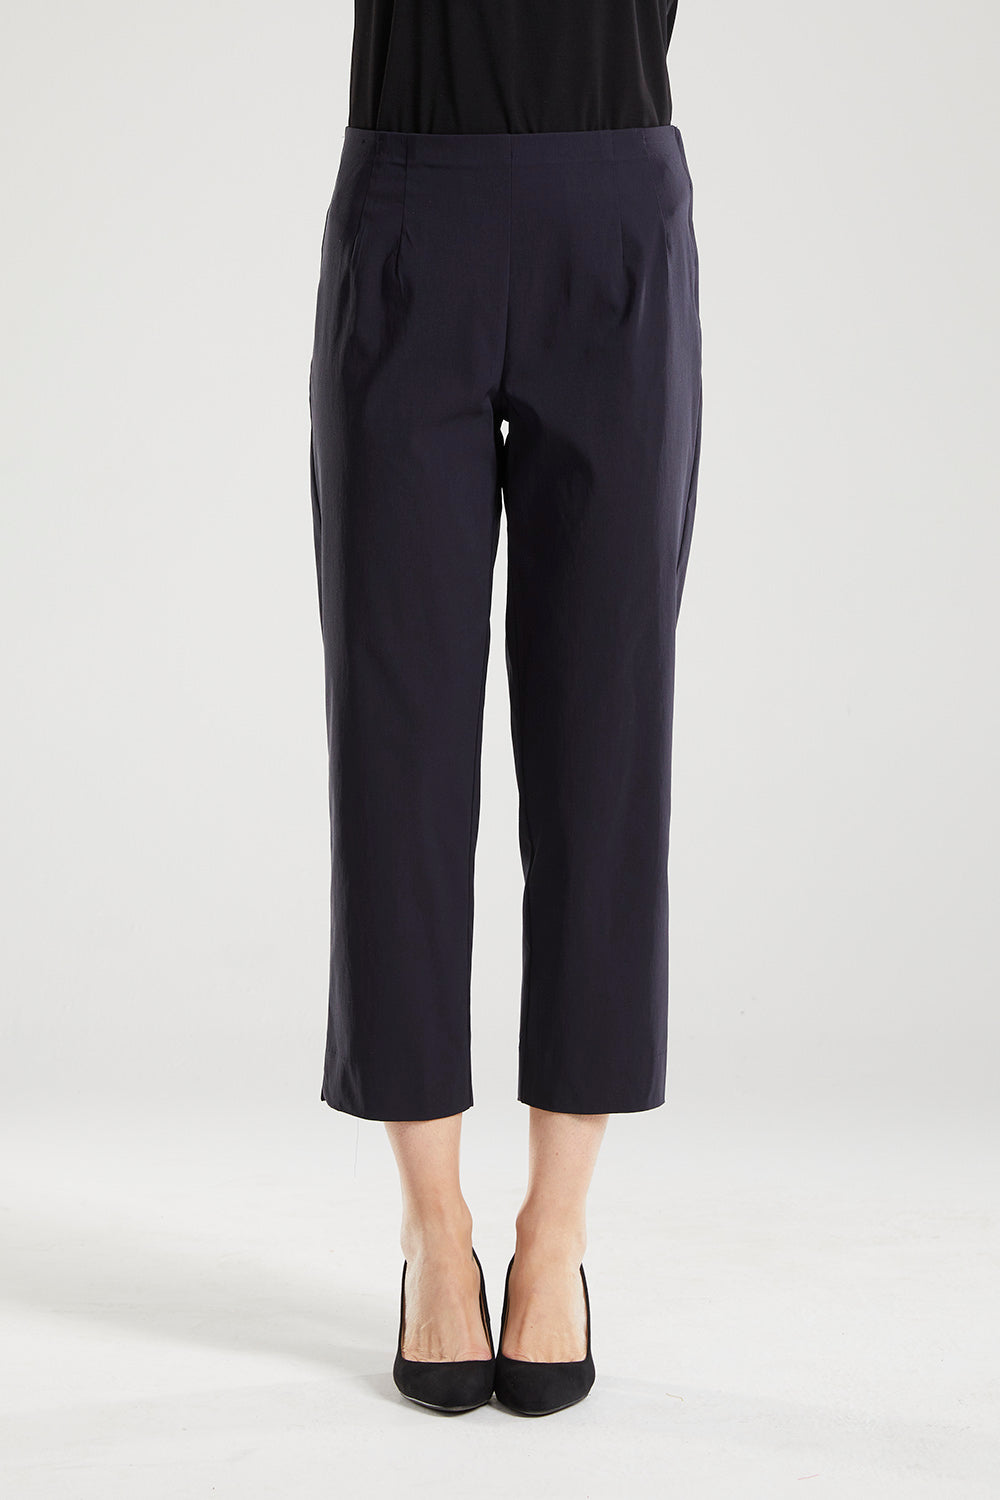 Philosophy Bengaline 7/8 Classic Pant - French Navy